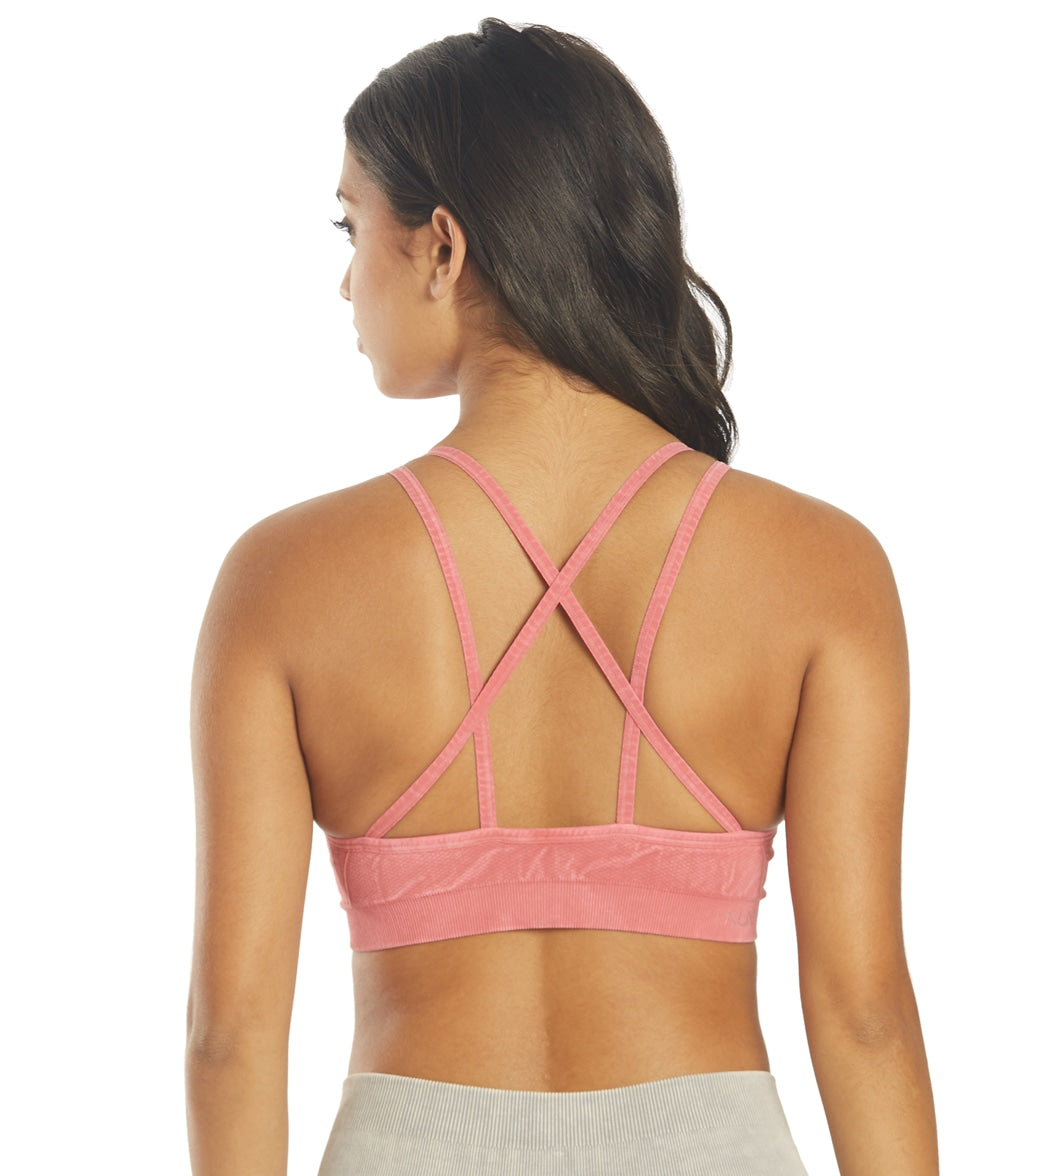 Aueoeo Gifts for Wife, Yoga Sports Bras for Women Women's No